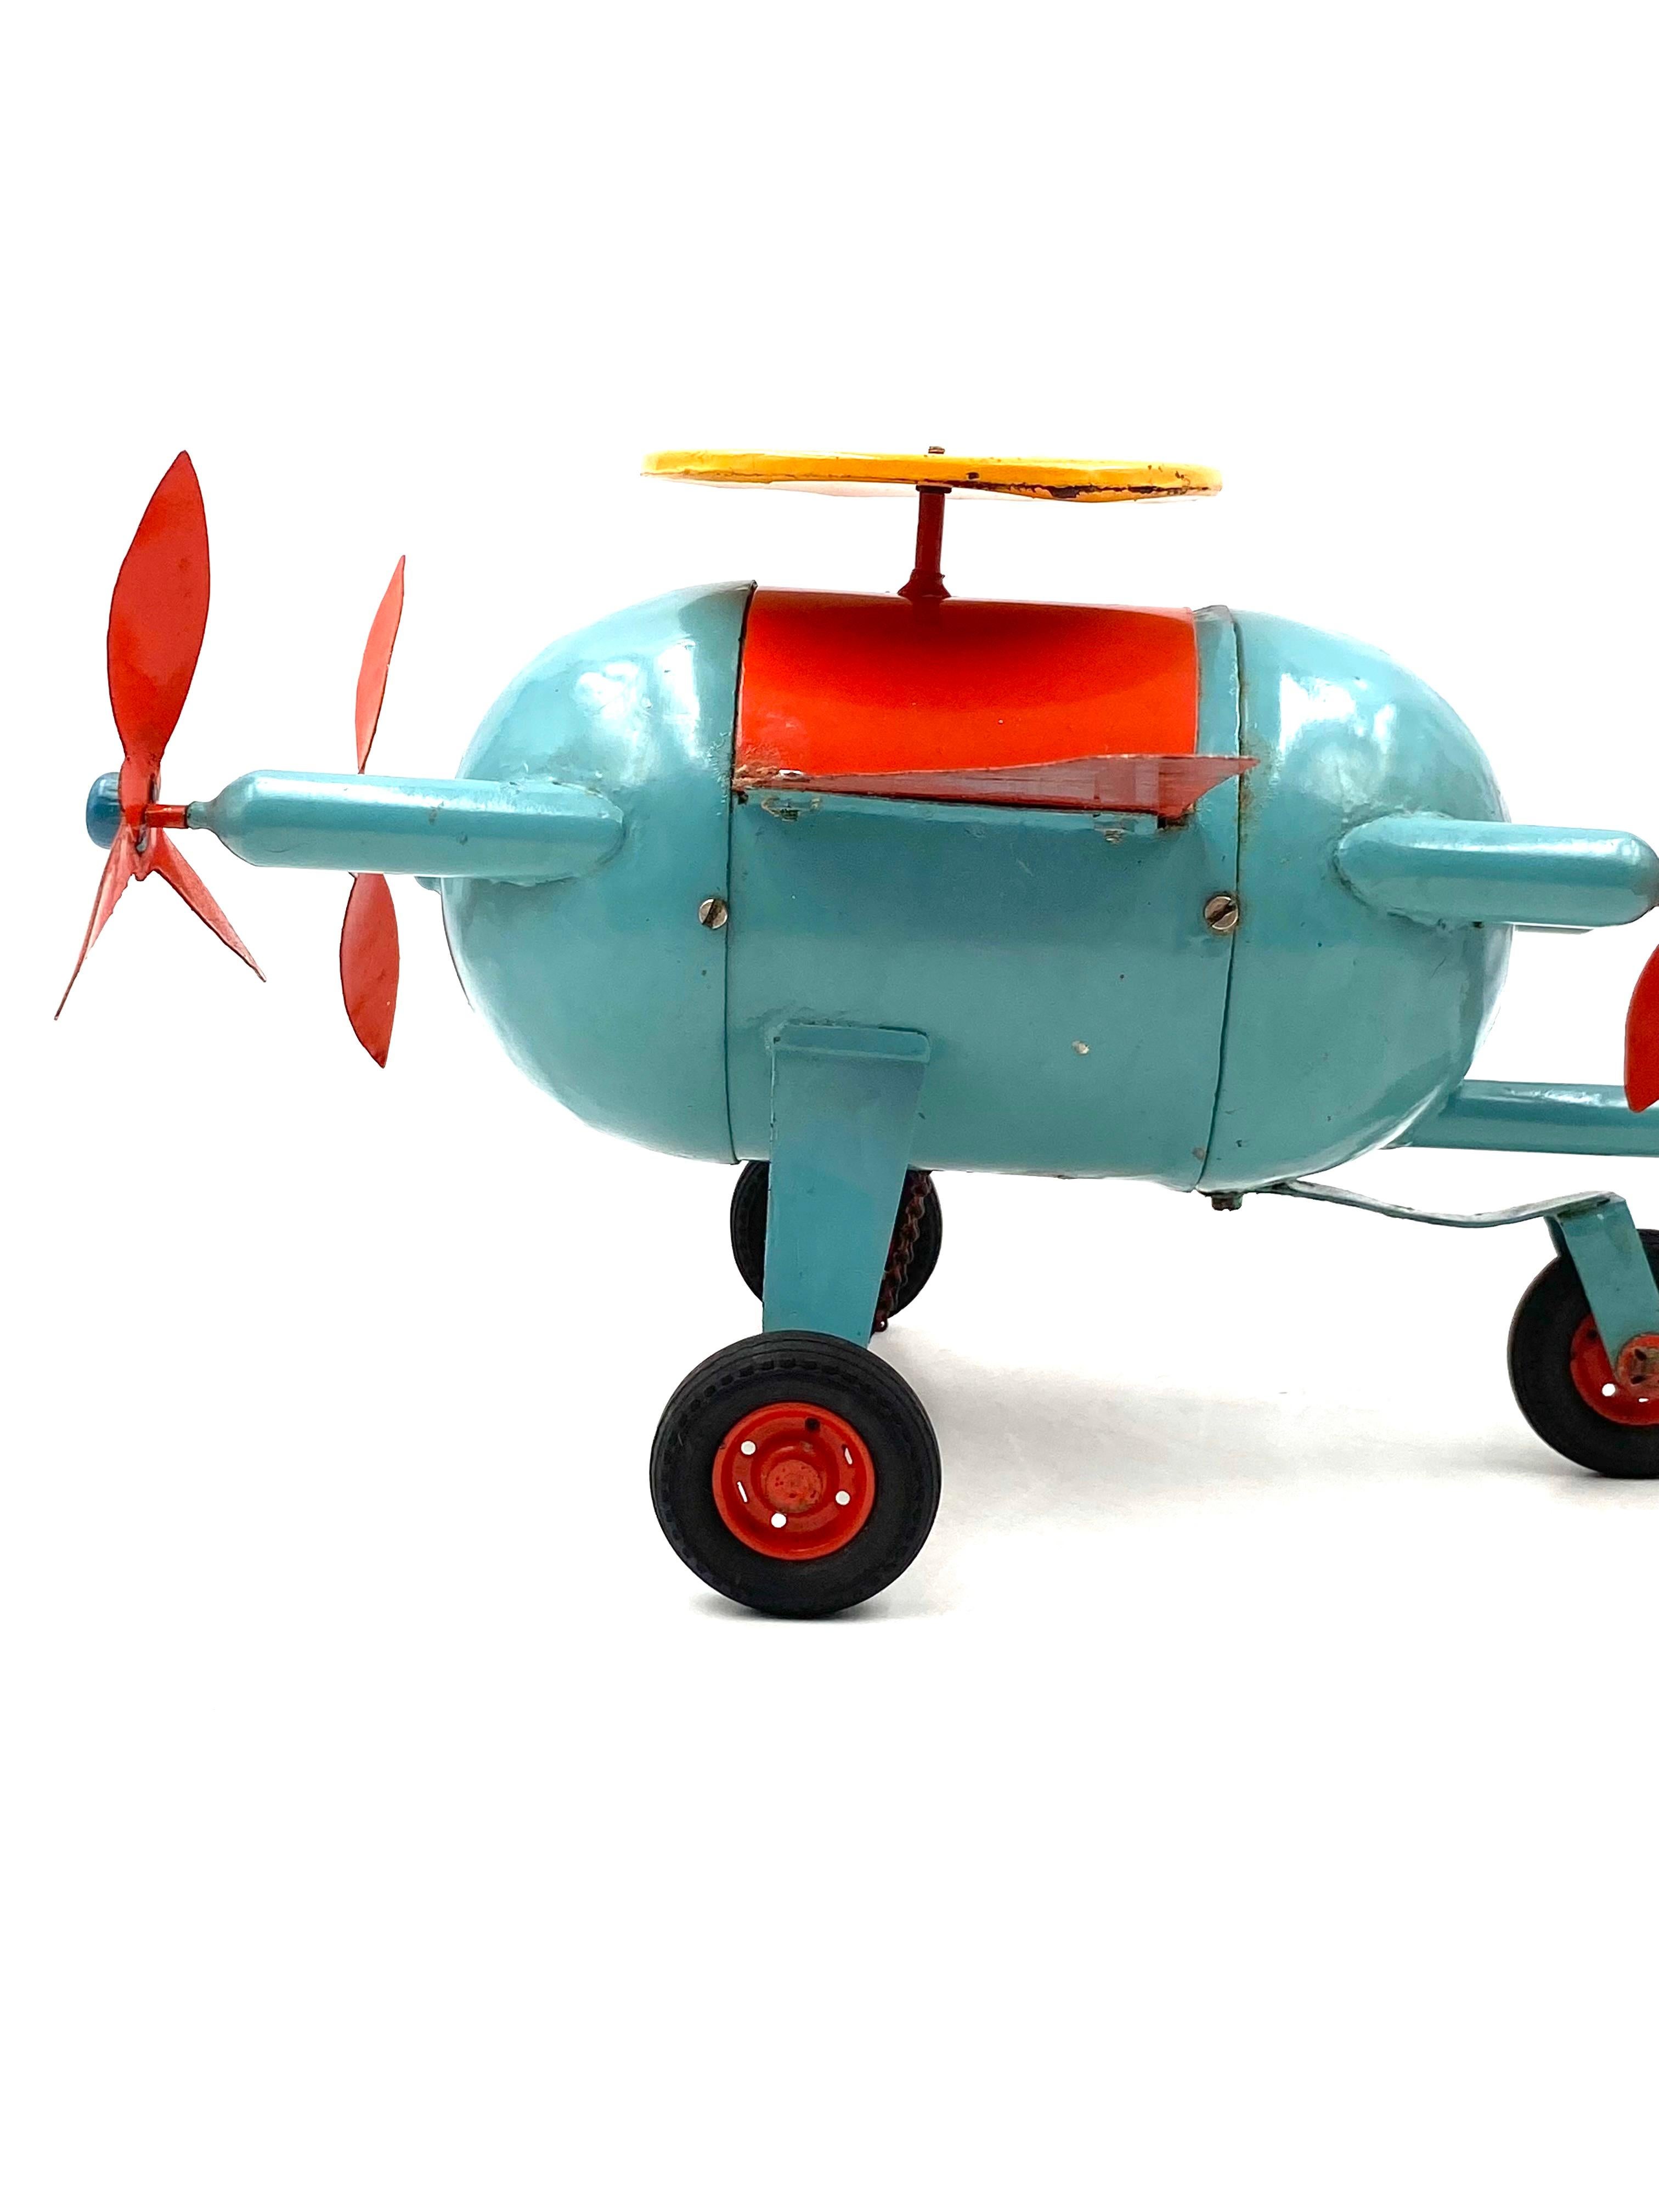 Red and blue airplane toy, France early 20th century For Sale 12